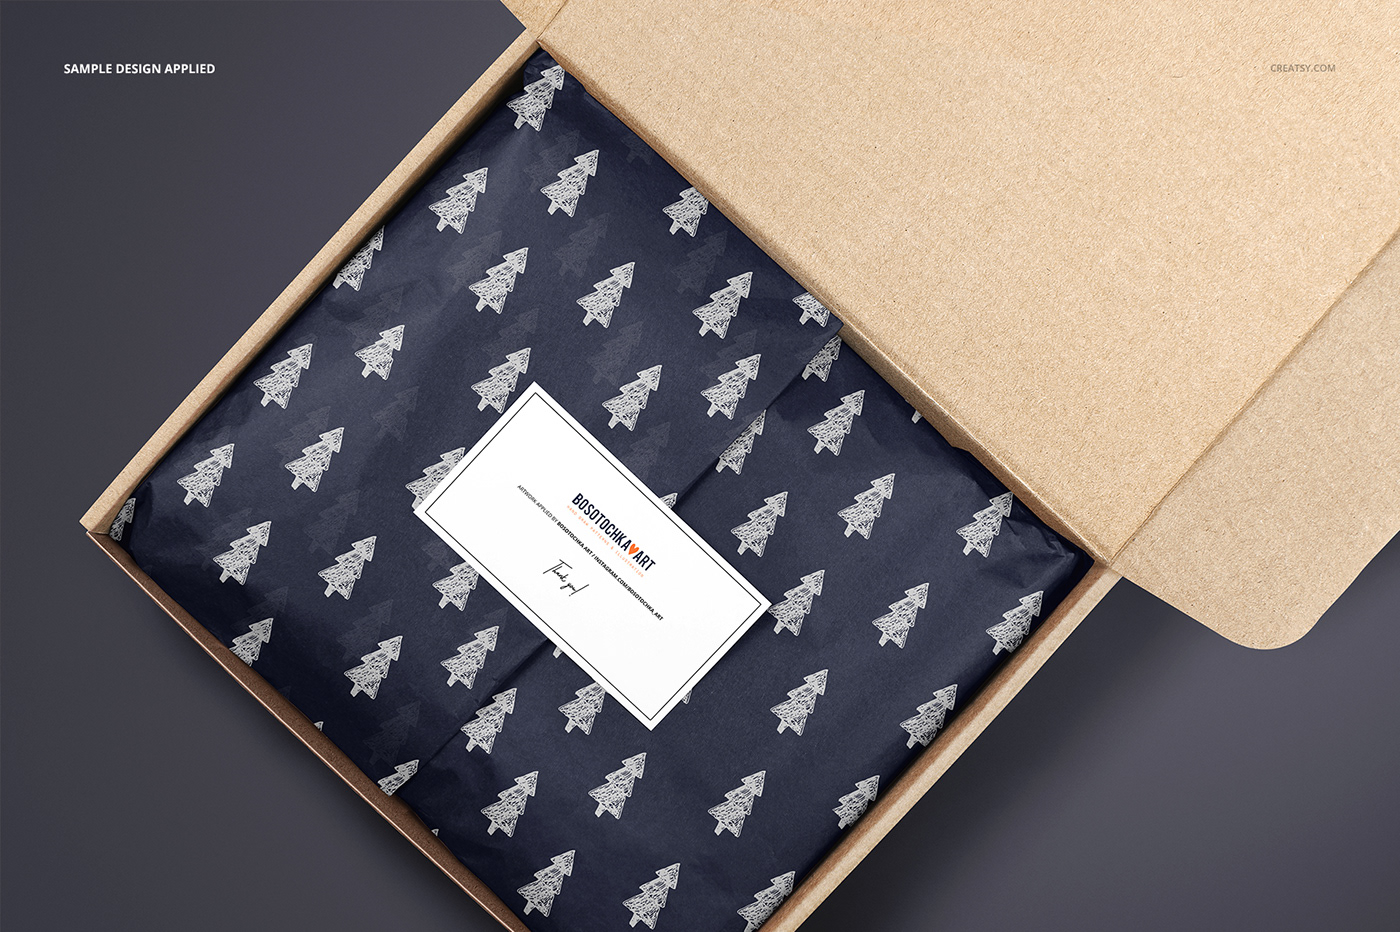 Mailer Box Wrapping Tissue Paper Mockup Set On Behance